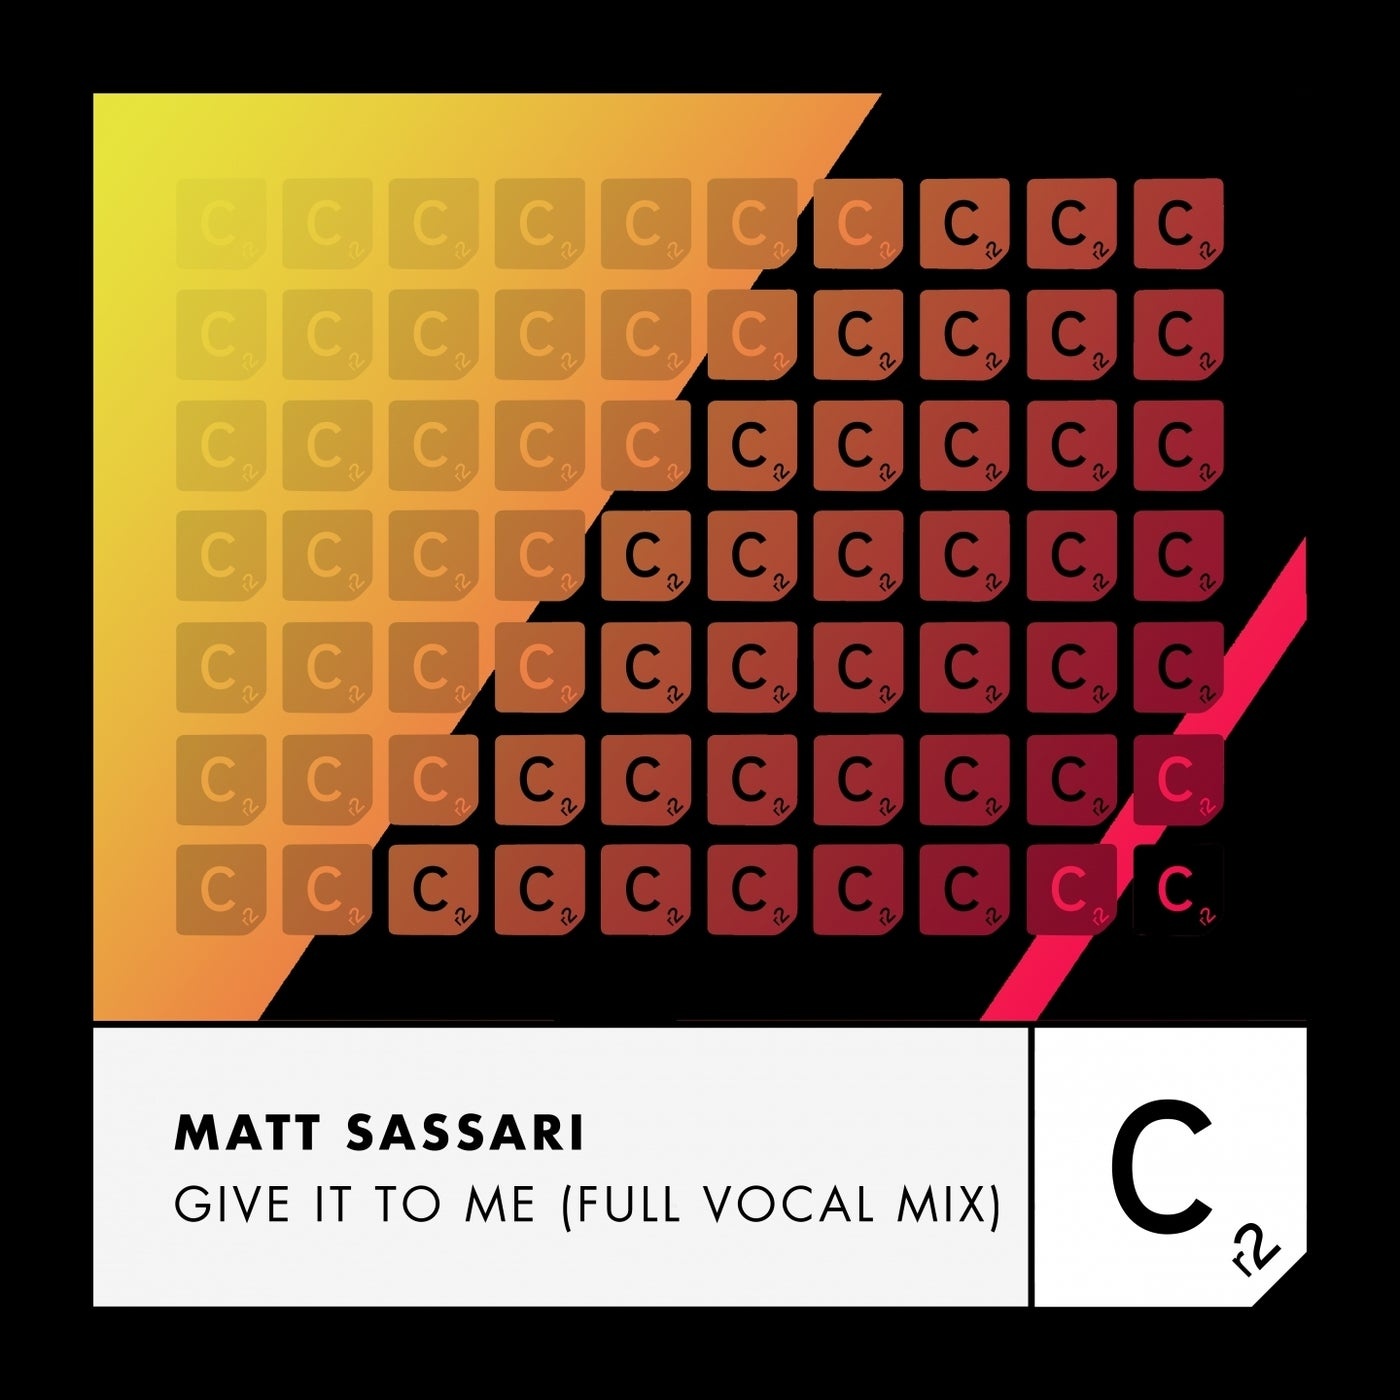 image cover: Matt Sassari - Give It To Me (Full Vocal Mix - Extended) / ITC3174BP